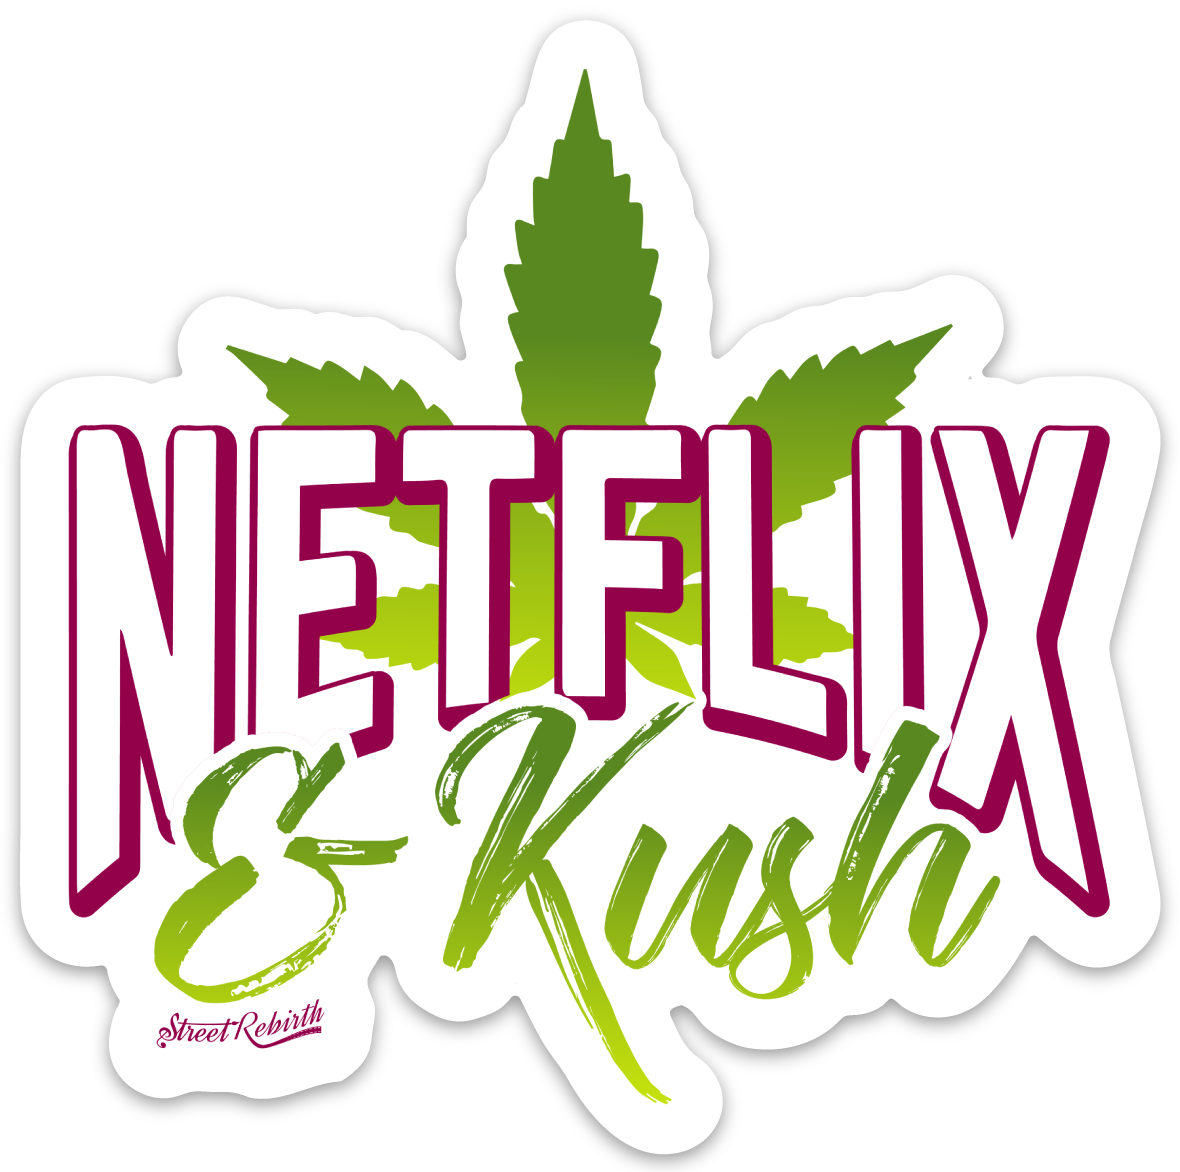 Netflix & Kush PUN STICKER – ONE 4 INCH WATER PROOF VINYL STICKER – FOR HYDRO FLASK, SKATEBOARD, LAPTOP, PLANNER, CAR, COLLECTING, GIFTING